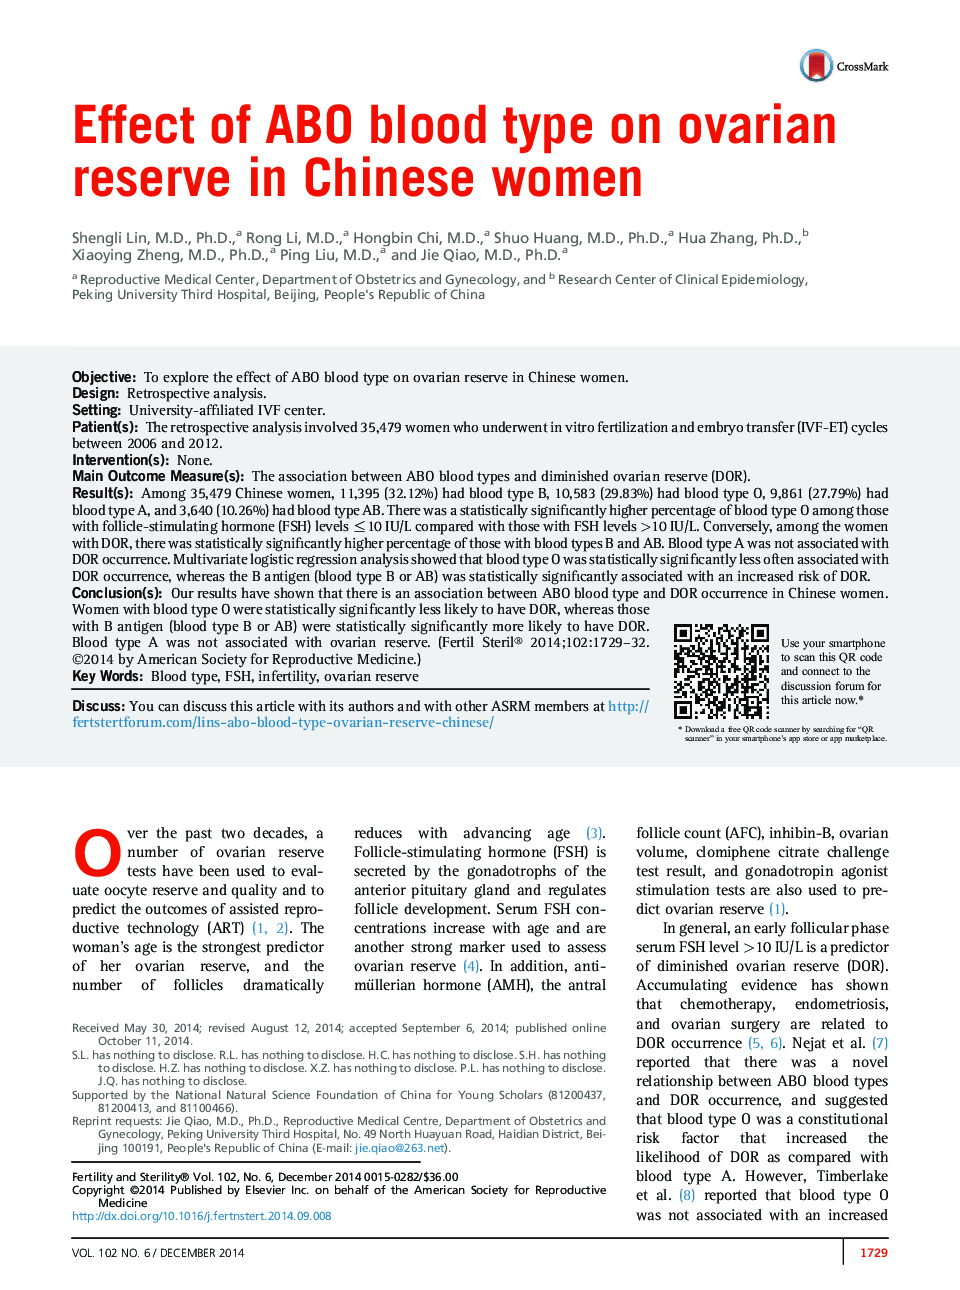 Effect of ABO blood type on ovarian reserve in Chinese women